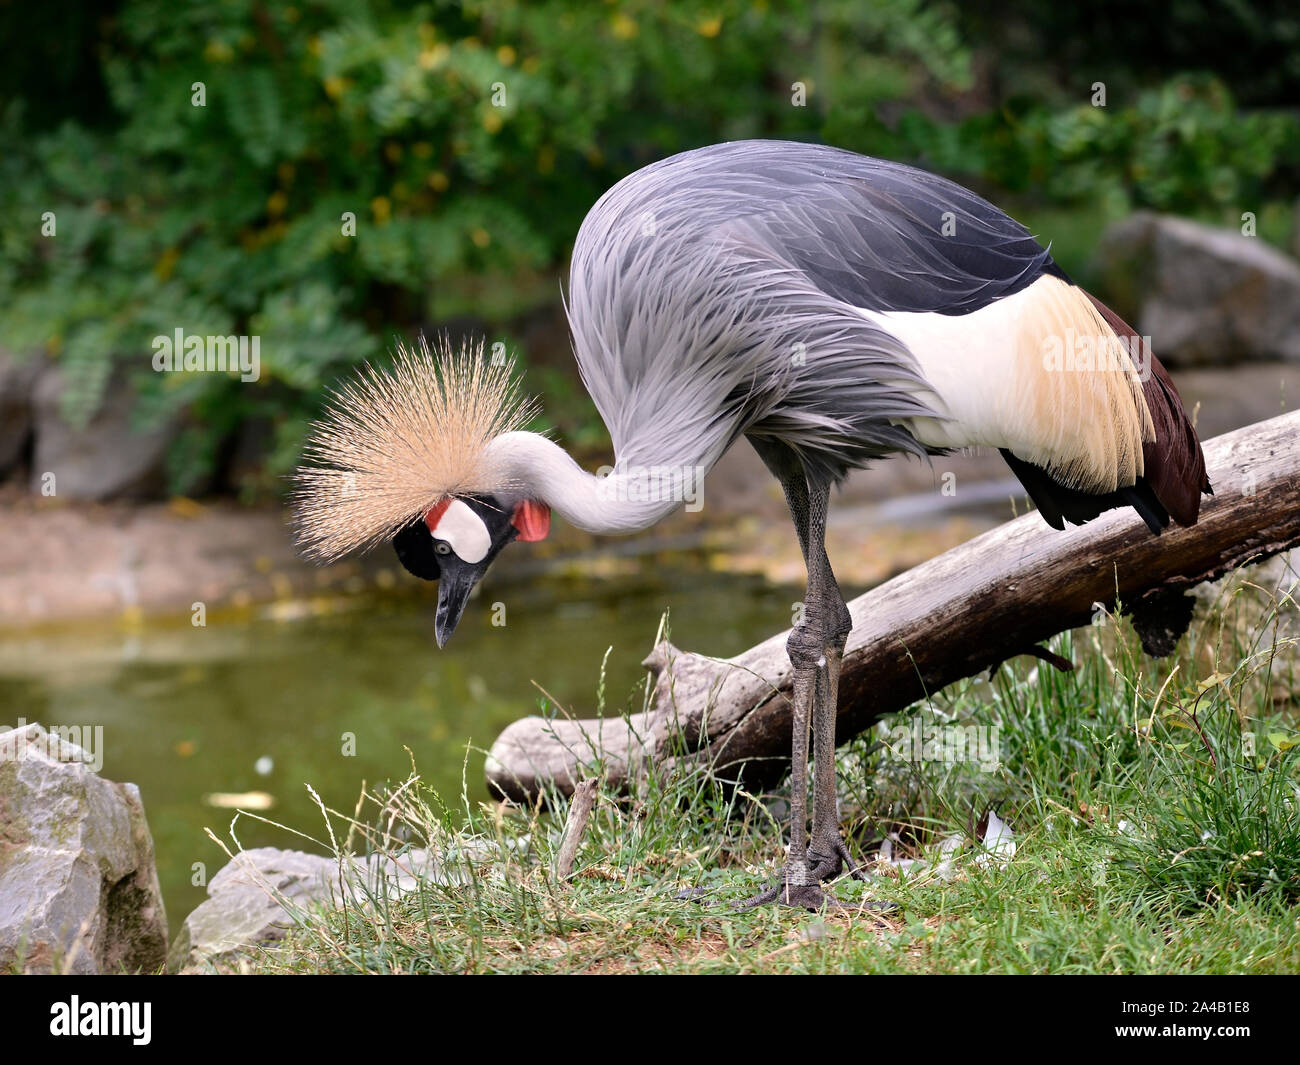 Closeup of Black Crowned Crane (Balearica pavonina) seen from profile Stock Photo